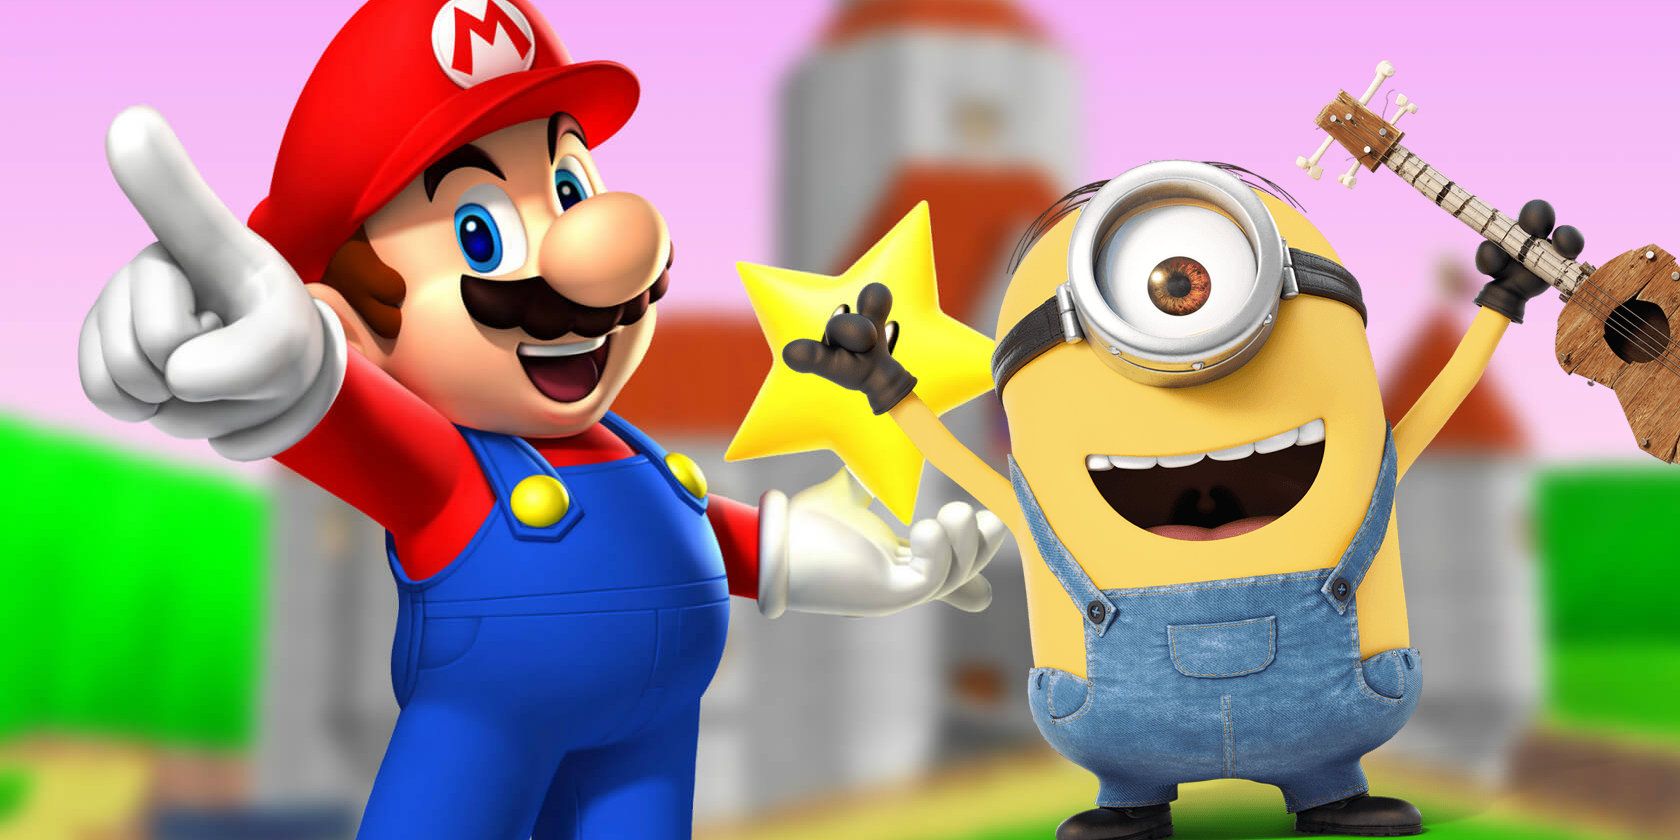 Super Mario Animated Movie In the Works | Screen Rant